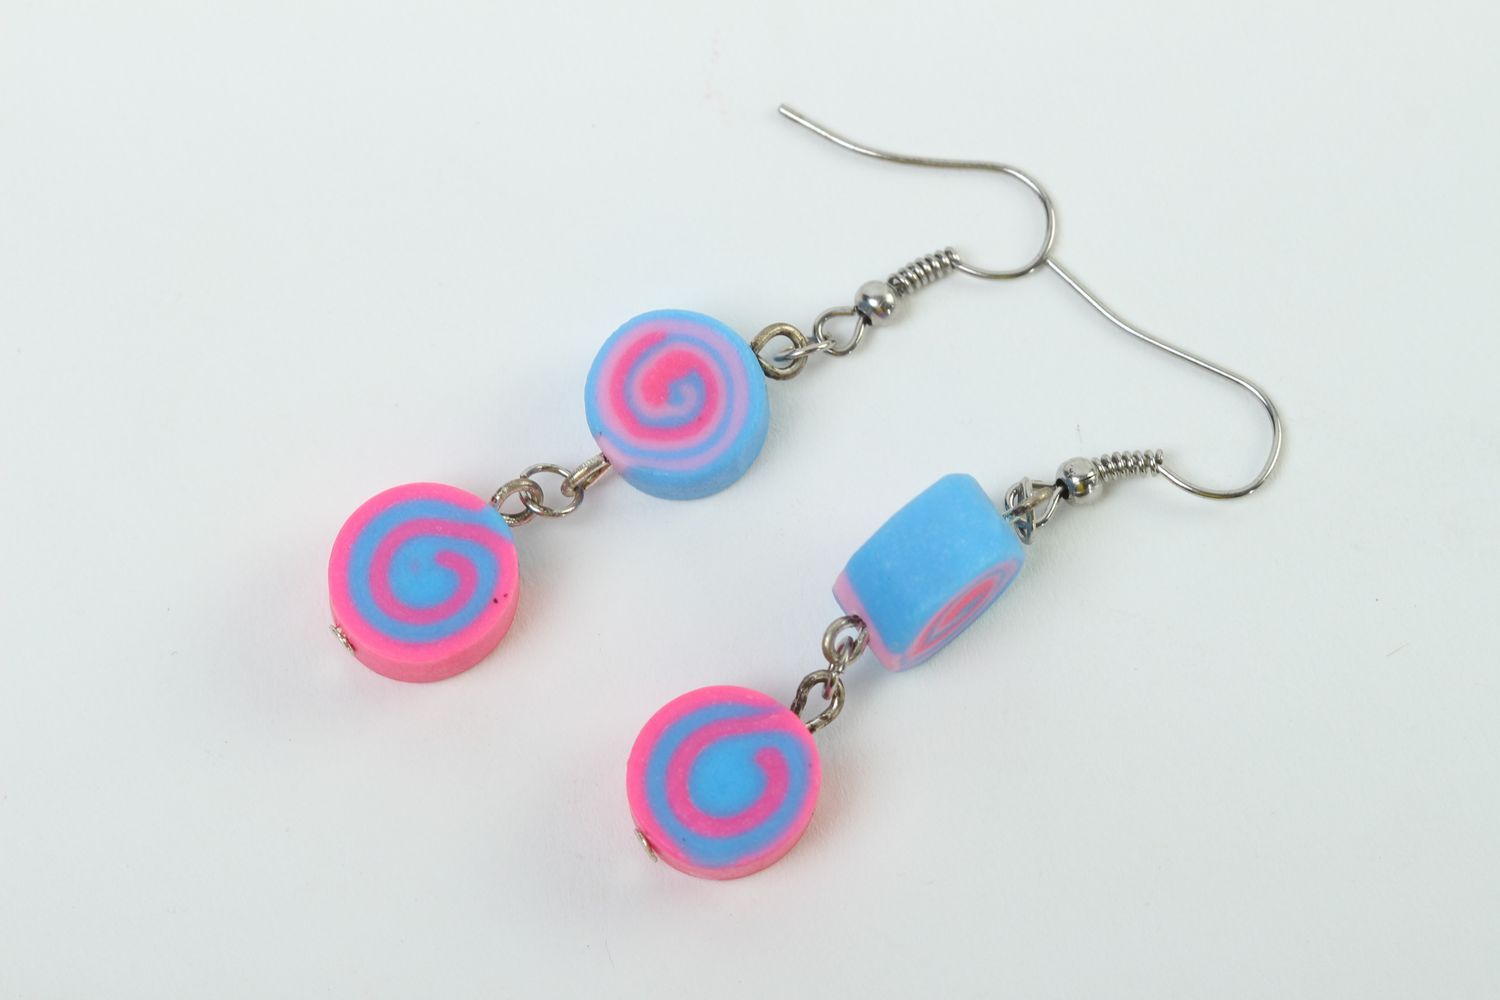 Handmade bright cute earrings designer polymer clay jewelry earrings with charms photo 2